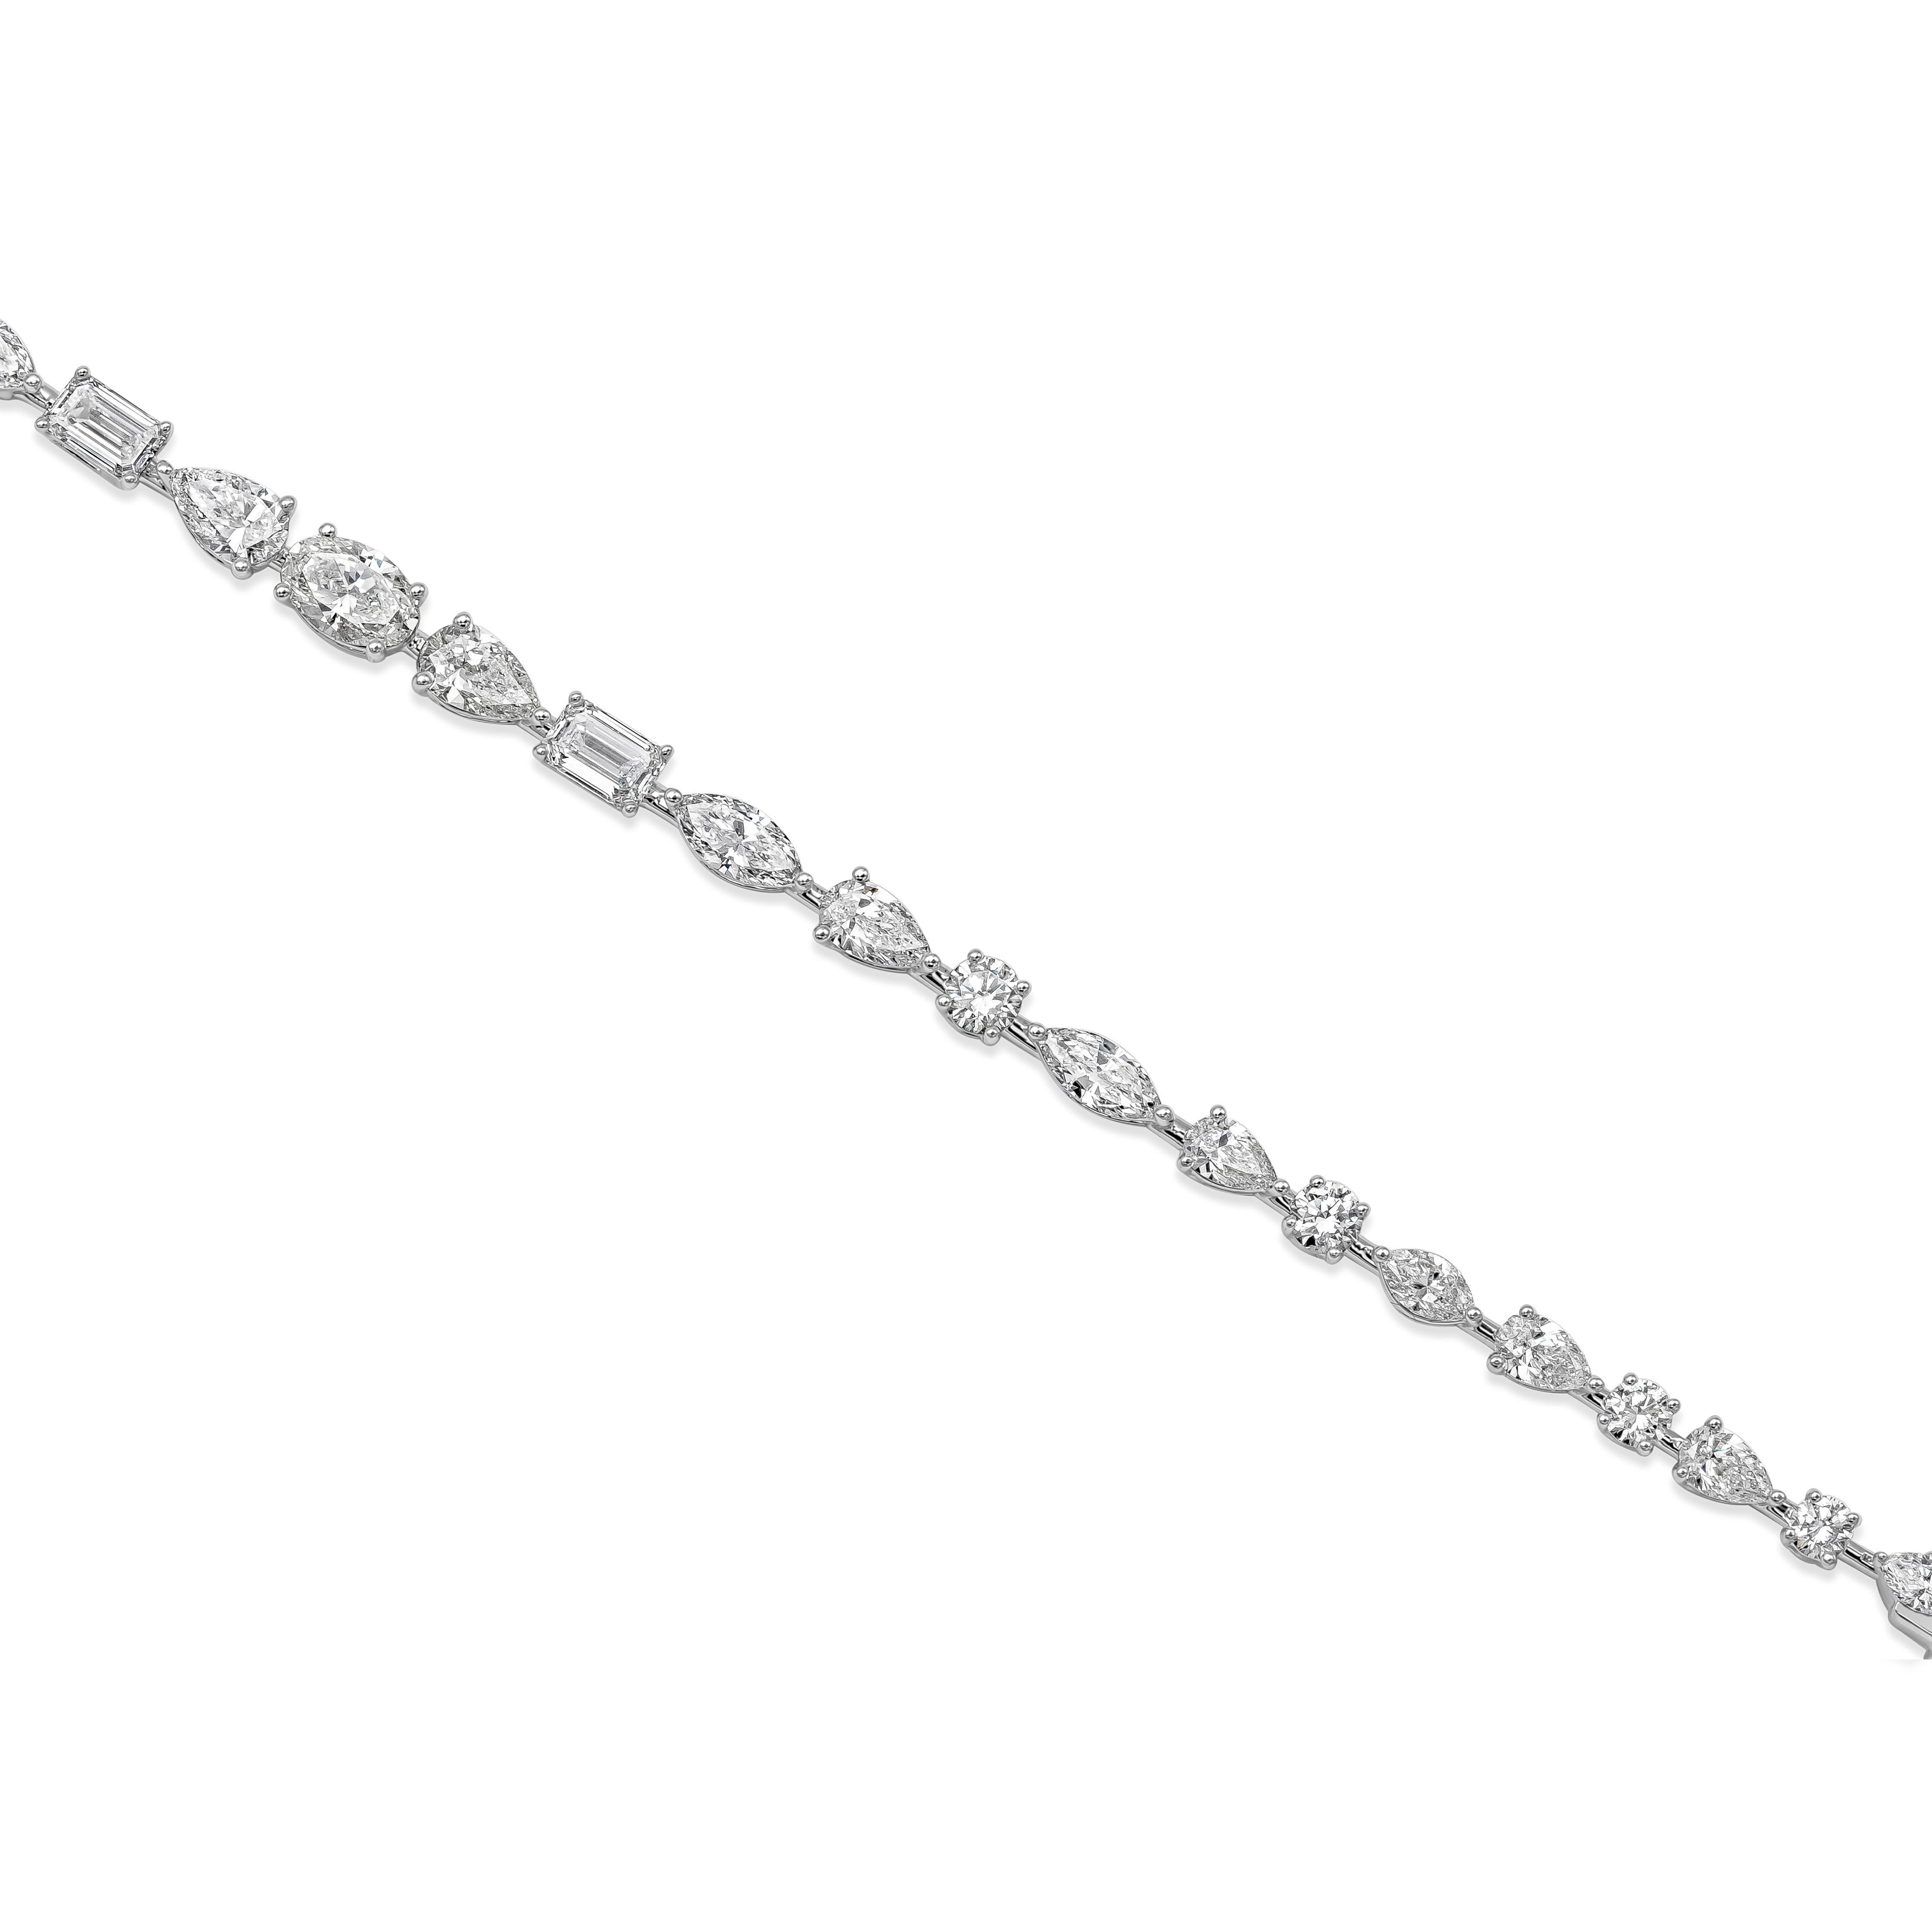 A simple yet lovely piece of jewelry that showcases a row of different shape diamonds weighing 4.87 carats total, G-H Color and SI in Clarity. Made with 18K White Gold, 7 inches in Length. 

Style available in different price ranges. Prices are